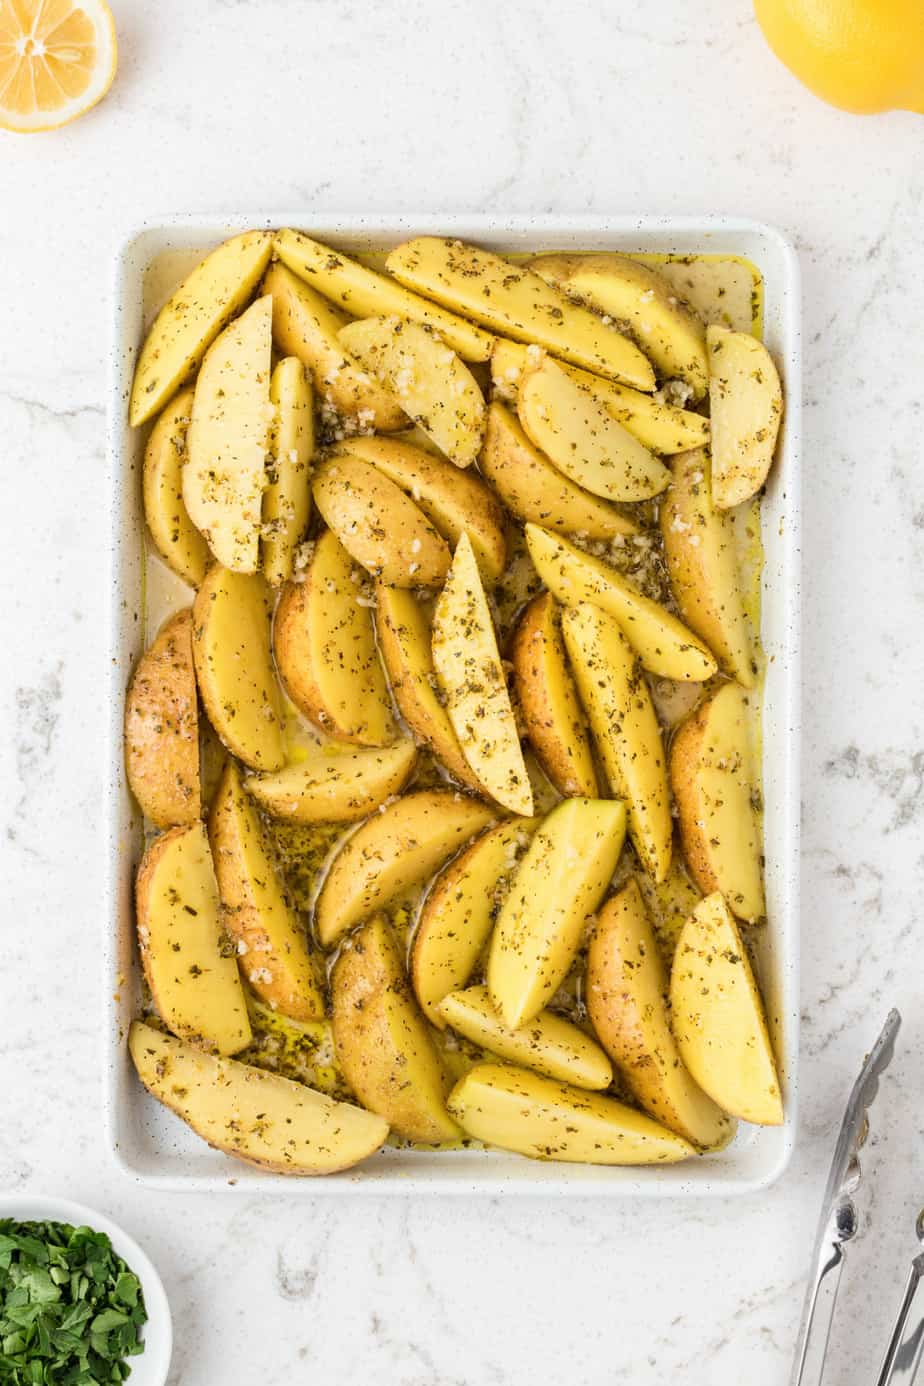 Potato wedges in a rimmed baking sheet seasoned before cooking